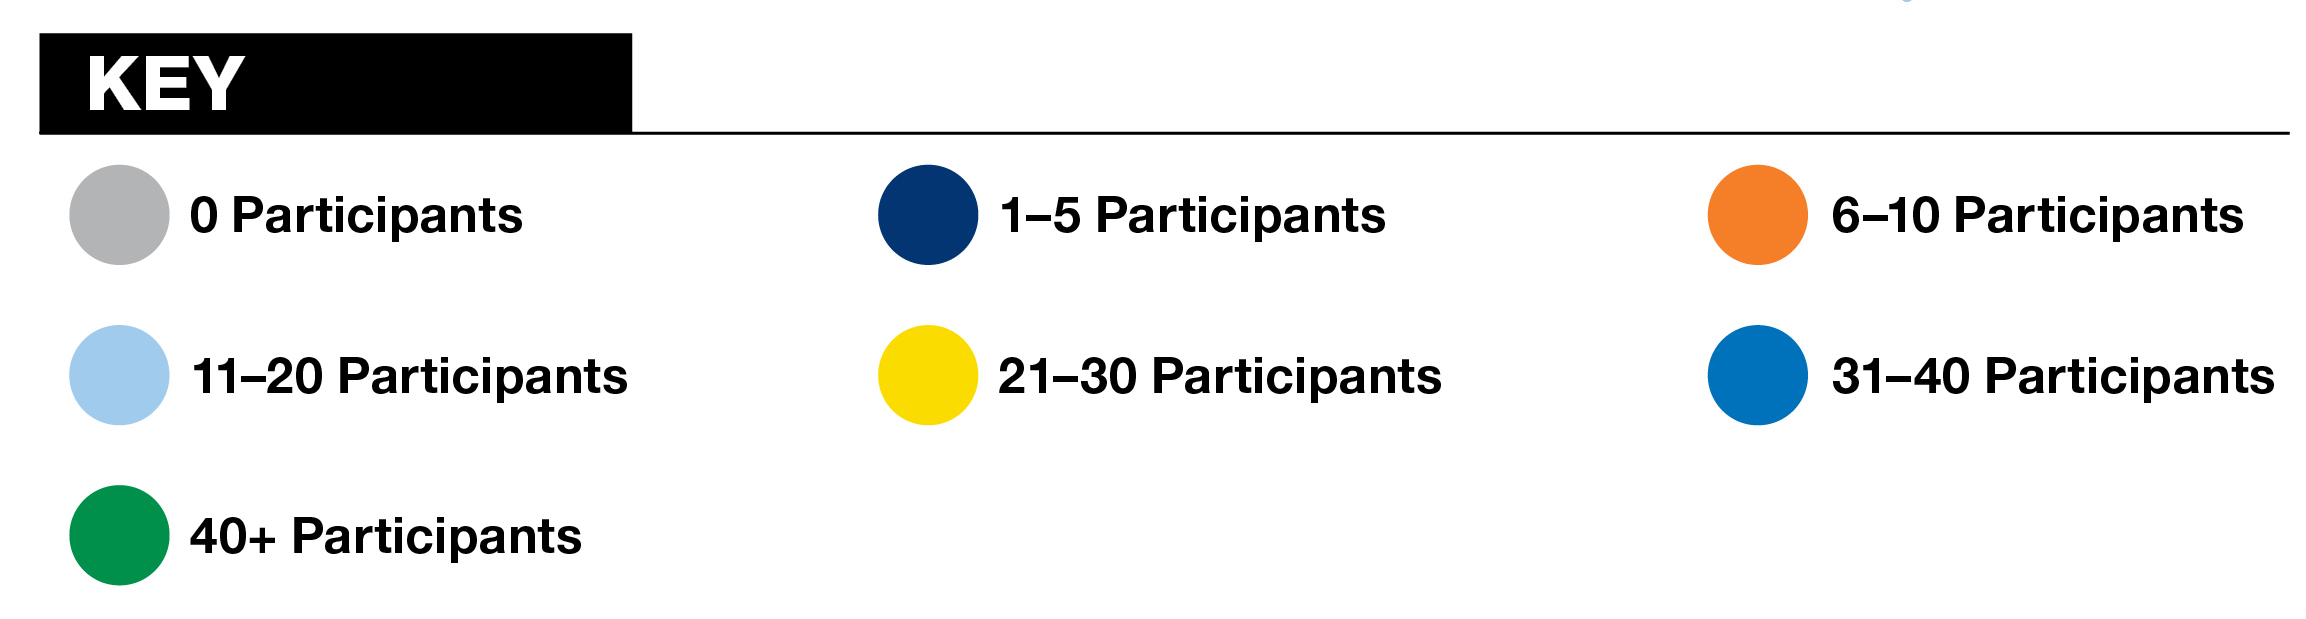 The key for the map of participants that is color coded by the amount of participants. The gray color indicates 0 participants, the dark blue color indicates 1 to 5 participants, the orange color indicates 6 to 10 participants, the light blue color indicates 11 to 20 participants, the yellow color indicates 21 to 30 participants, the medium blue color indicates 31 to 40 participants, and the green color indicates 40+ participants. 